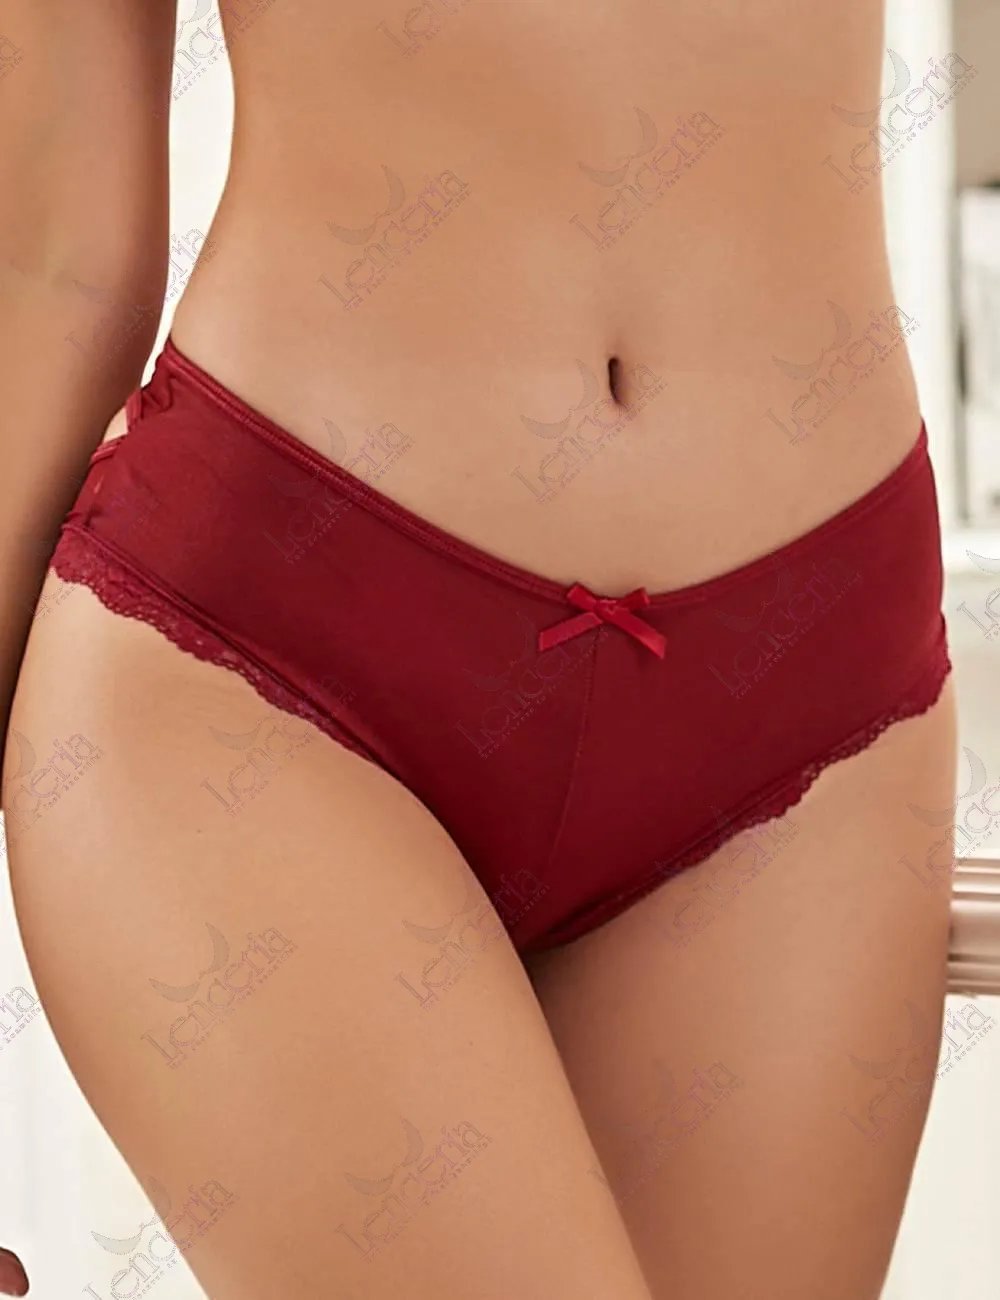 Heuca wine panty - extremely sexy (a38)